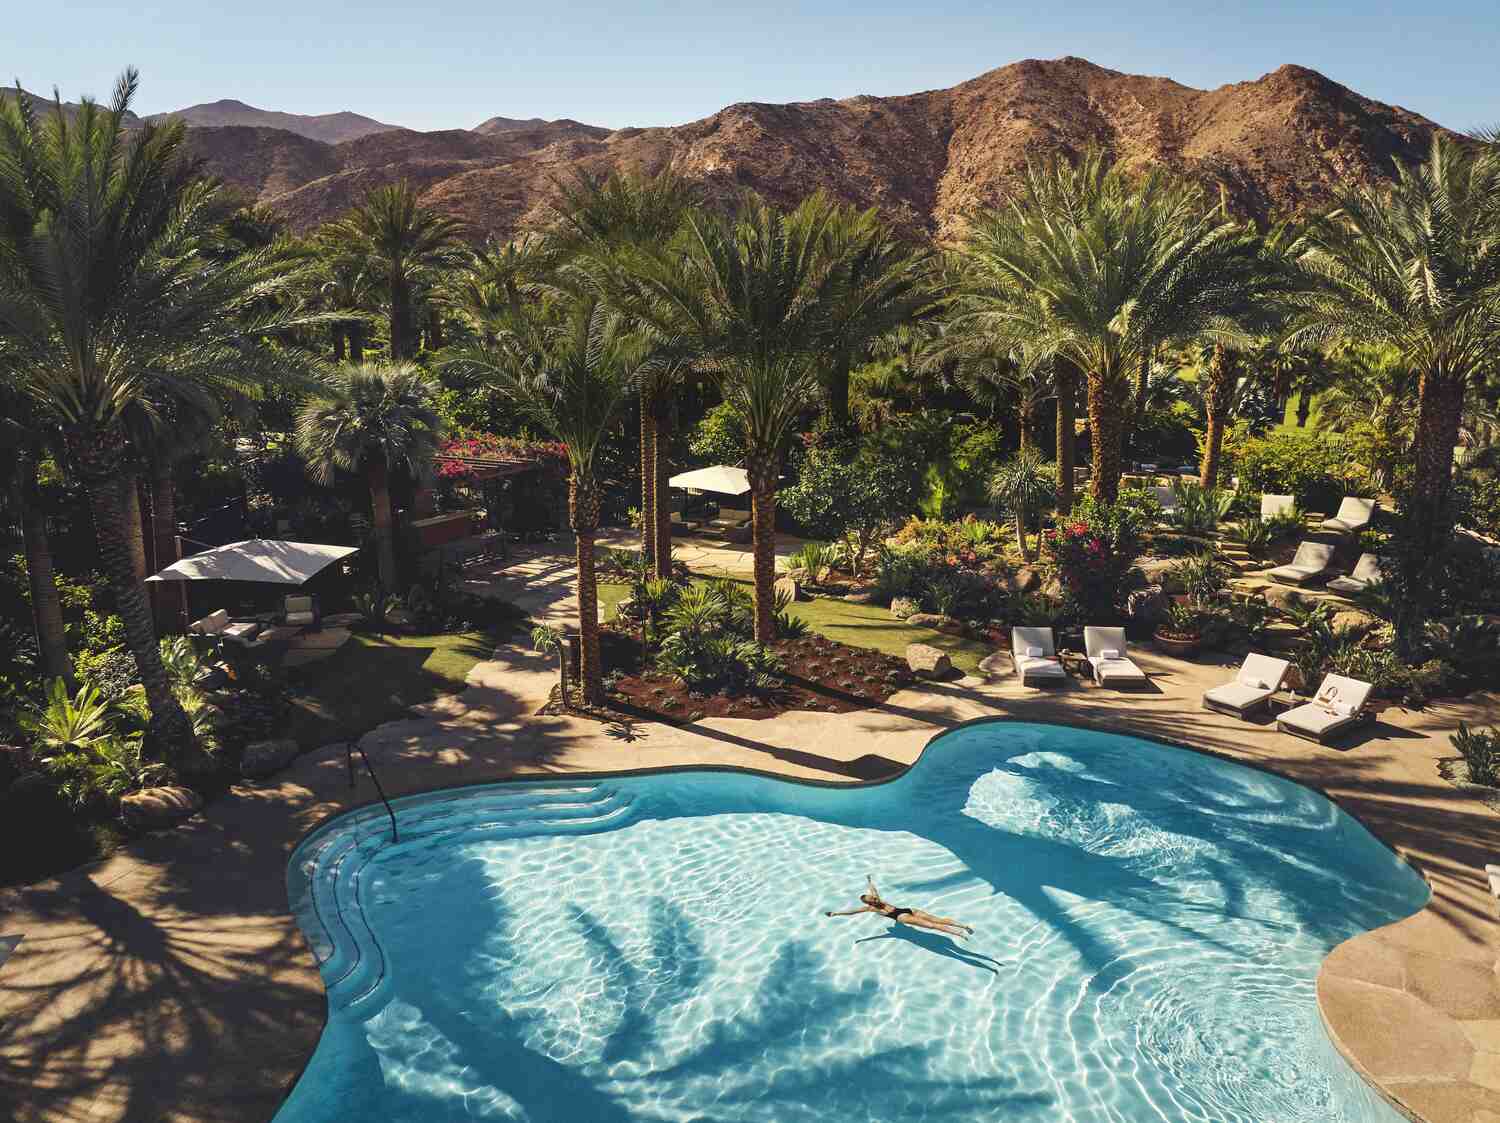 sensei porcupine creek pool surrounded by palm trees and mountains